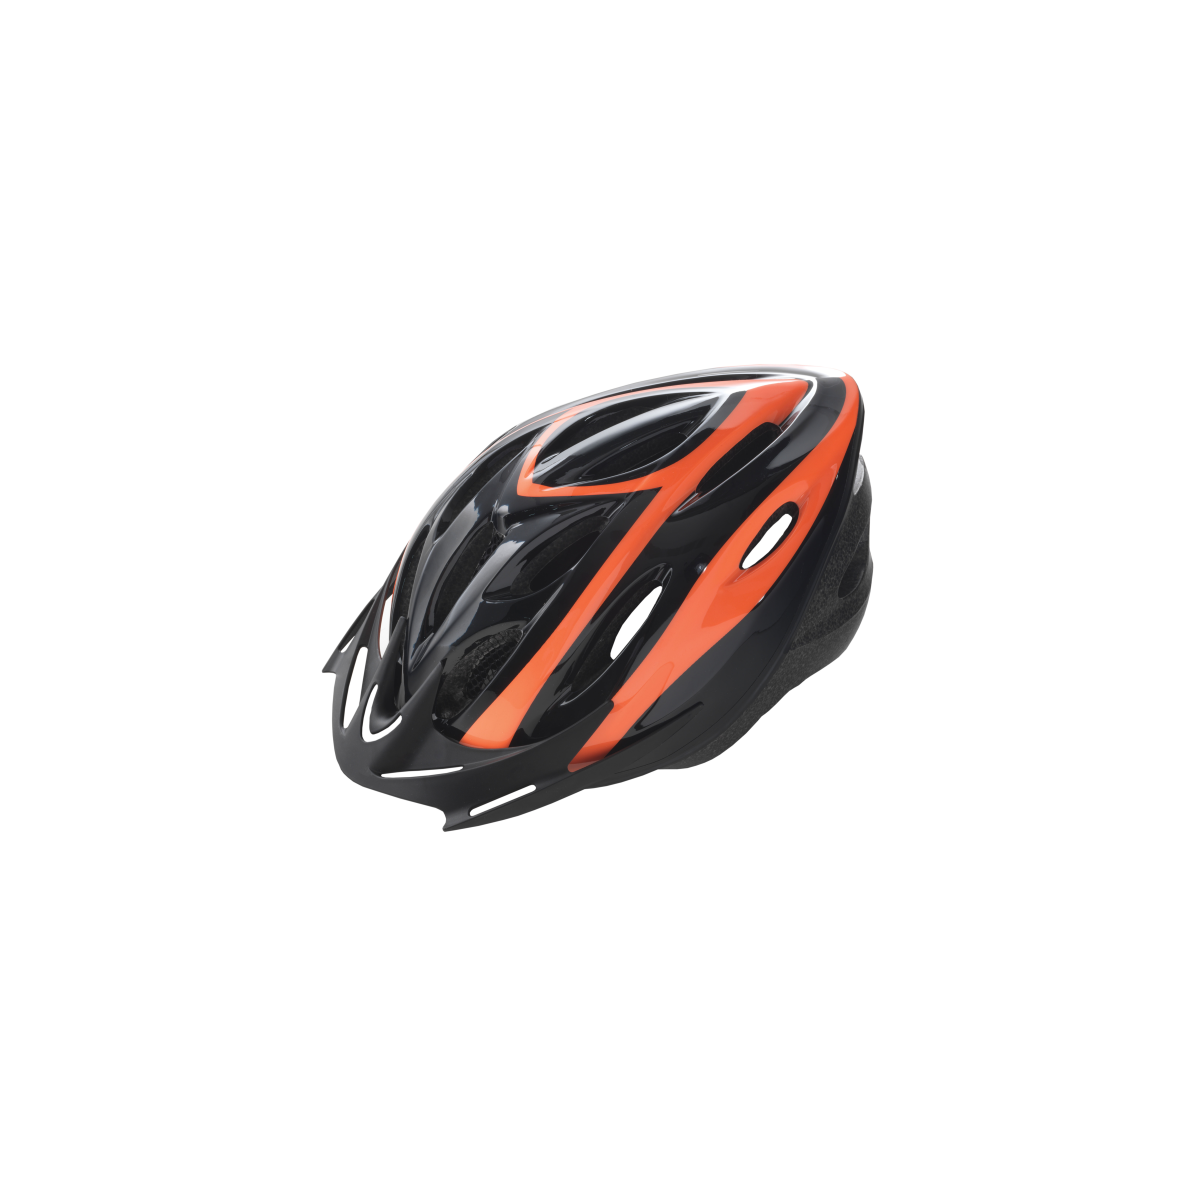 CASCO RIDER OUT-MOULD NEGRO/NARANJA T.M 54-58C WAG